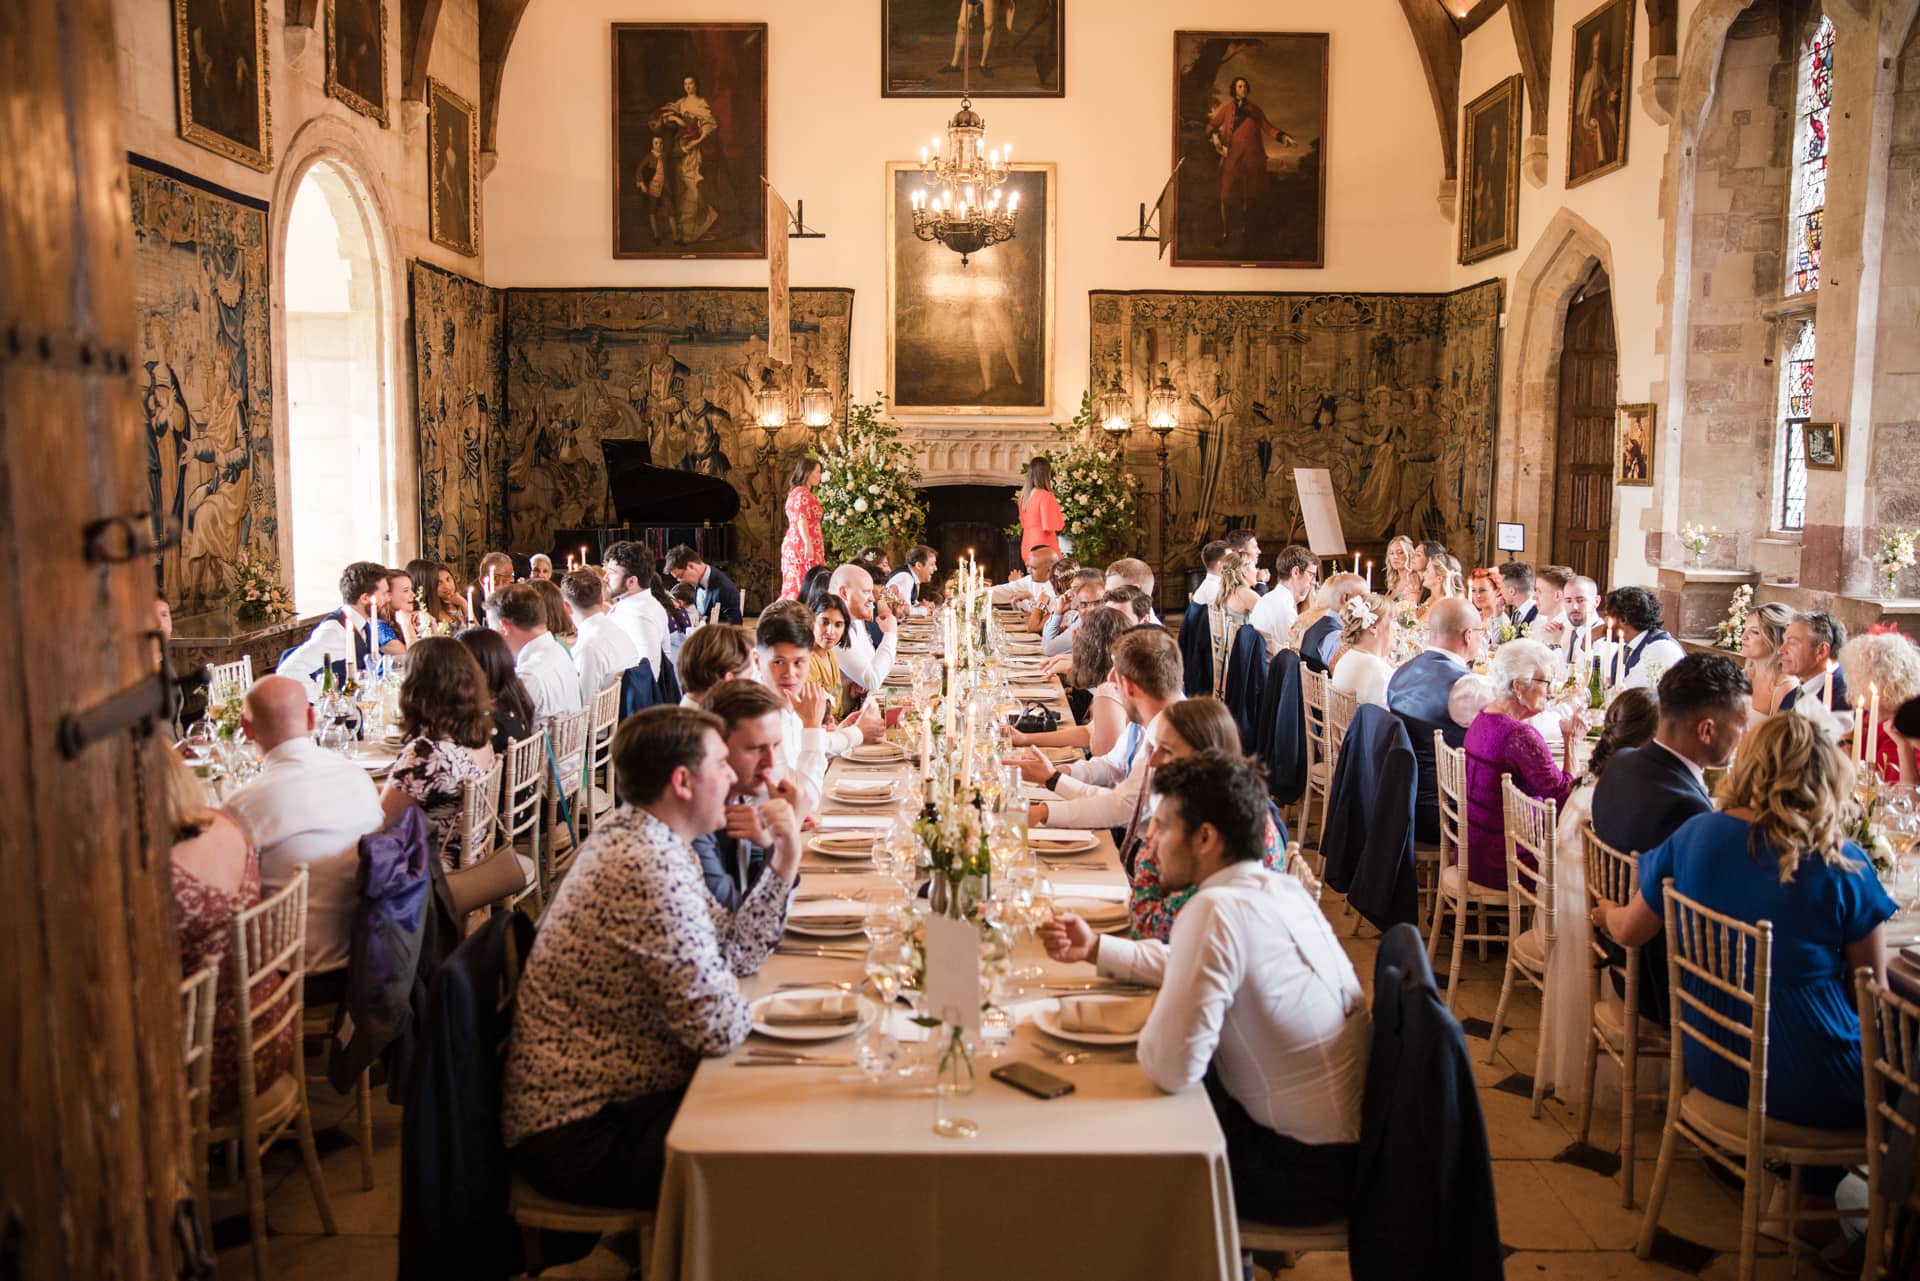 All seated in the grand hall for wedding breakfast at the Berkeley Castle Wedding Venue